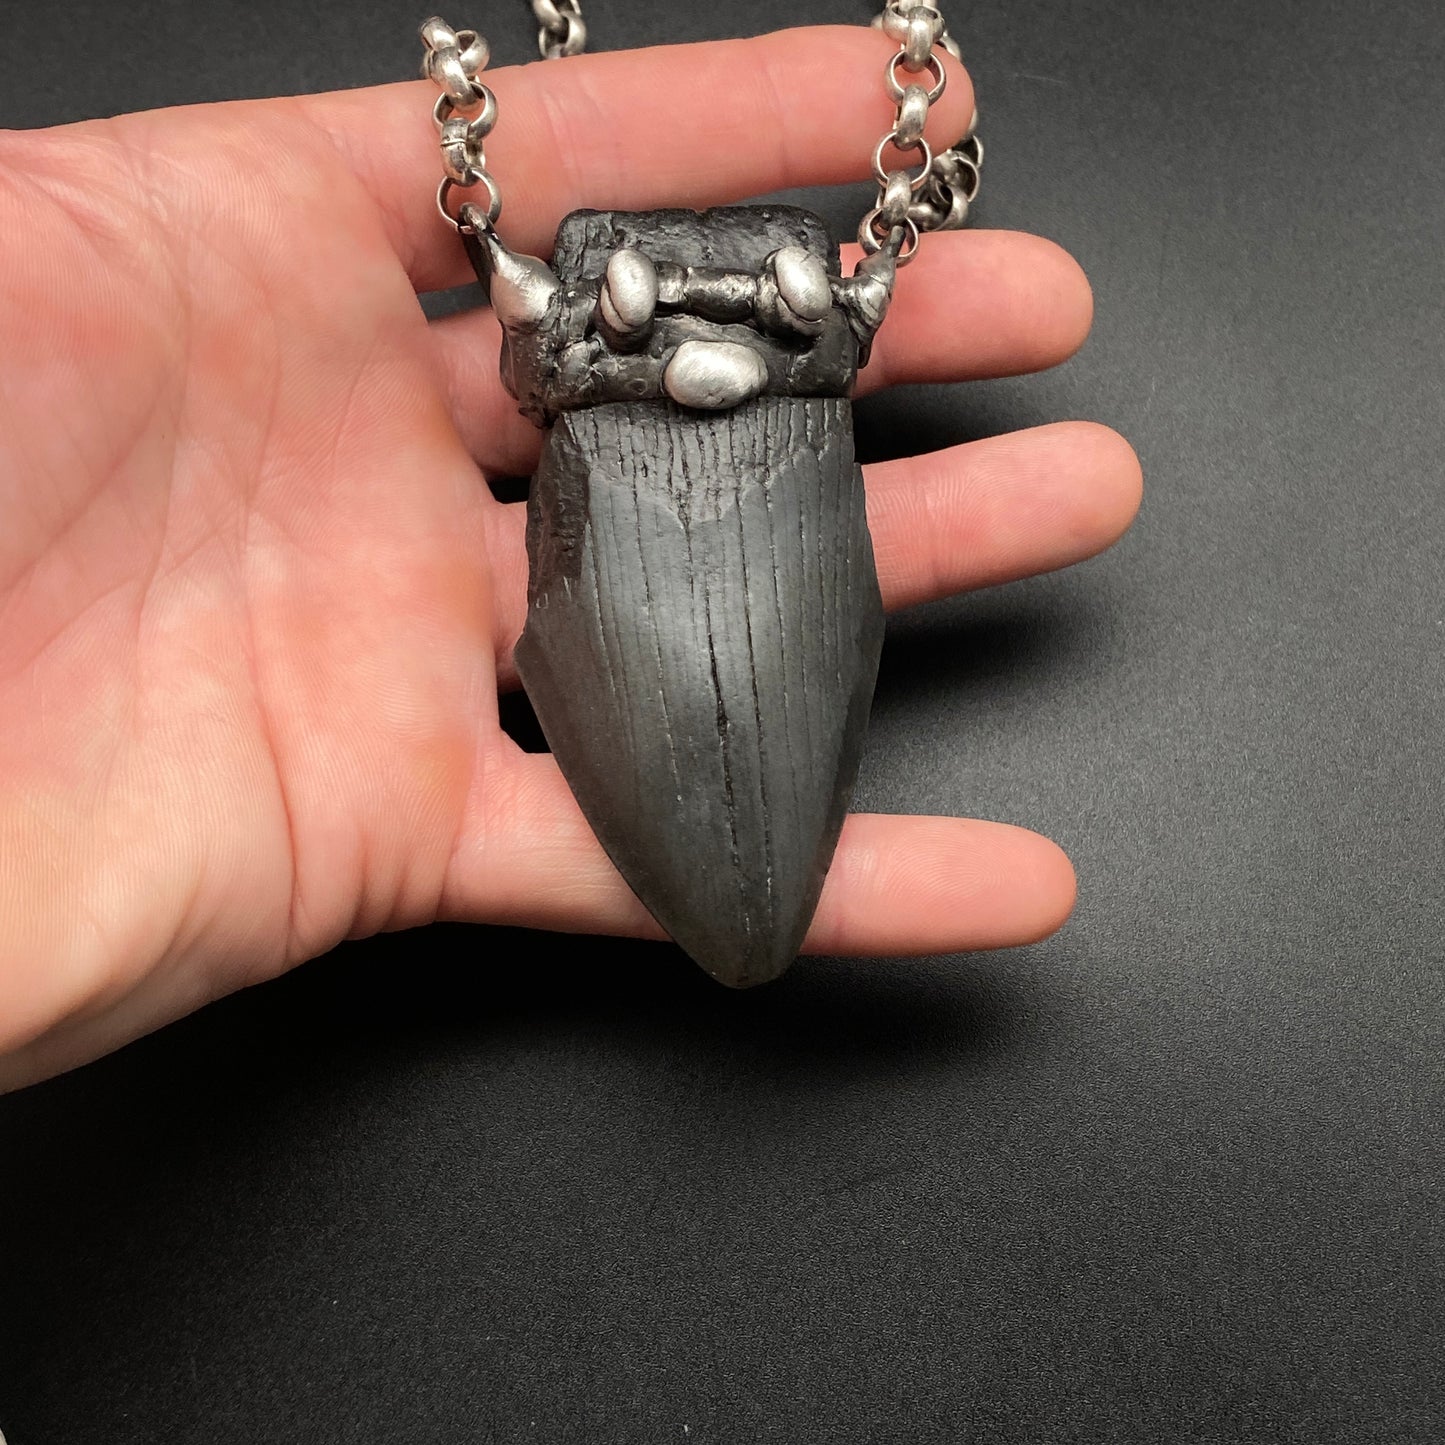 Aquatic Monster ~ Megalodon Tooth Necklace